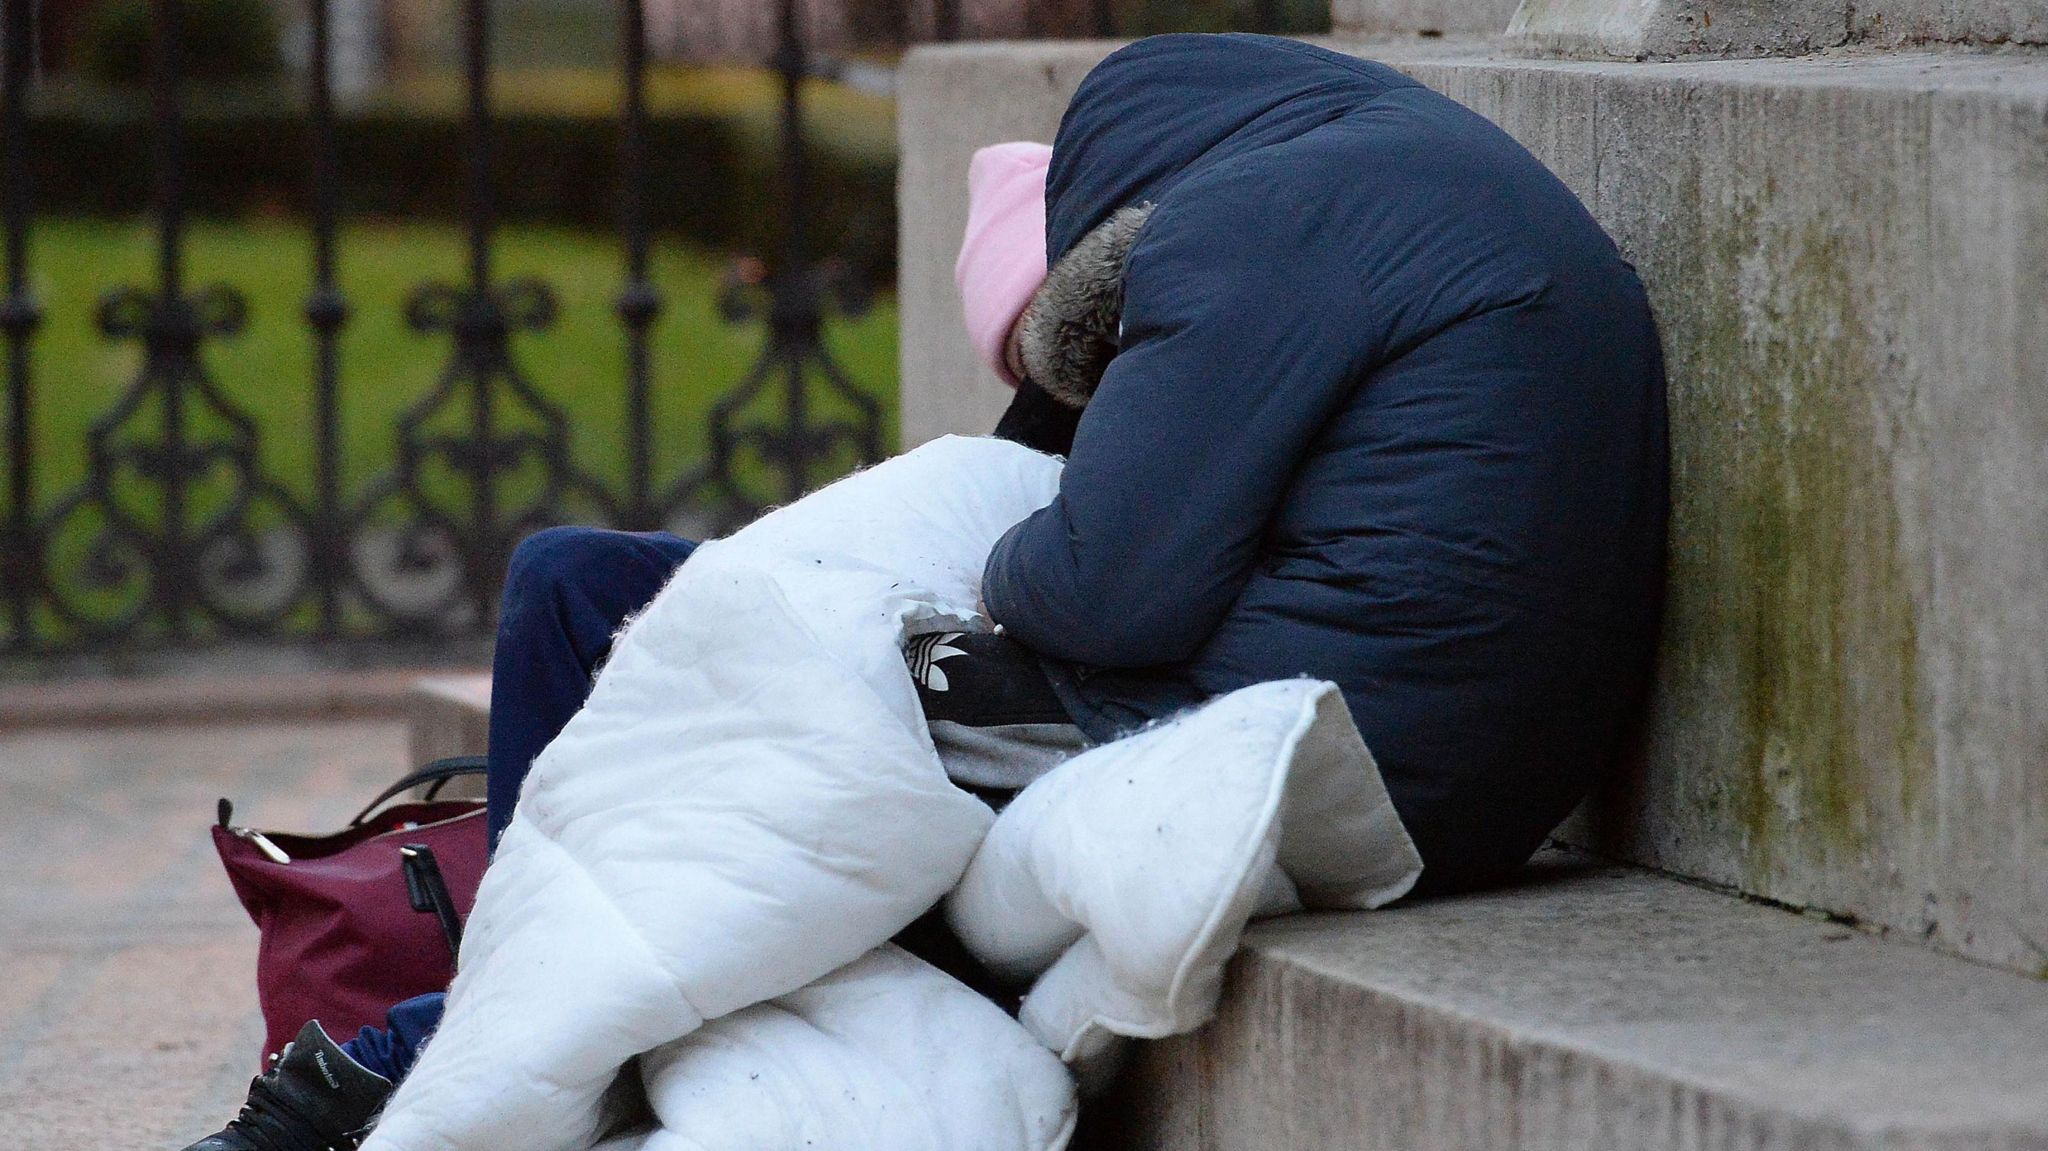 A homeless person rough sleeping in London